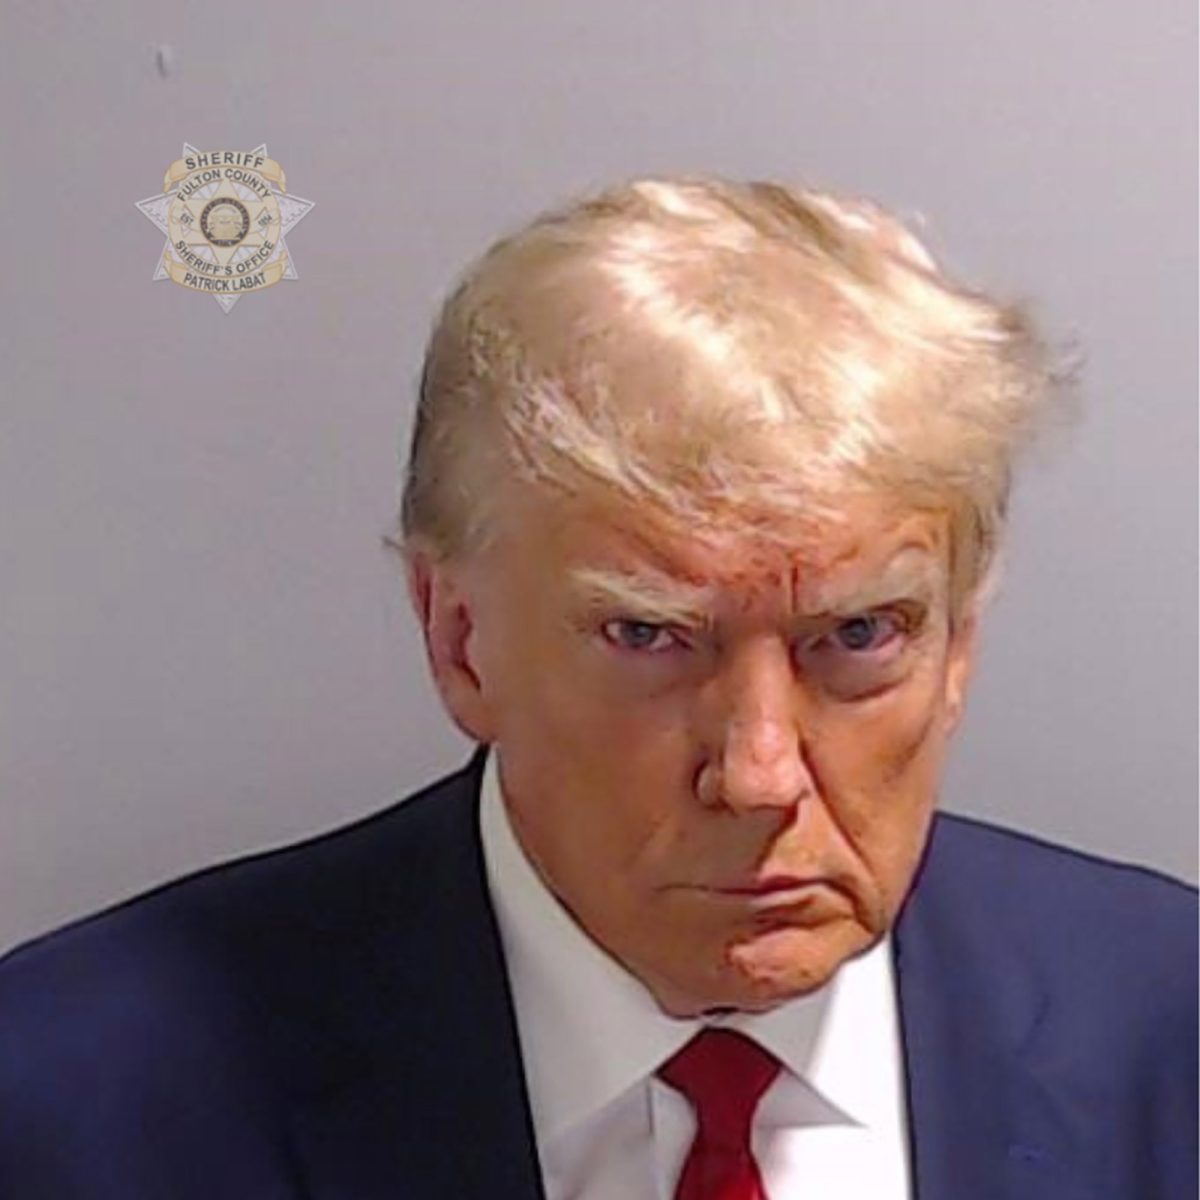 Trump+getting+his+picture+taken+for+his+mugshot+where+he+was+reported+at+6%E2%80%993+and+215+lbs.%0A